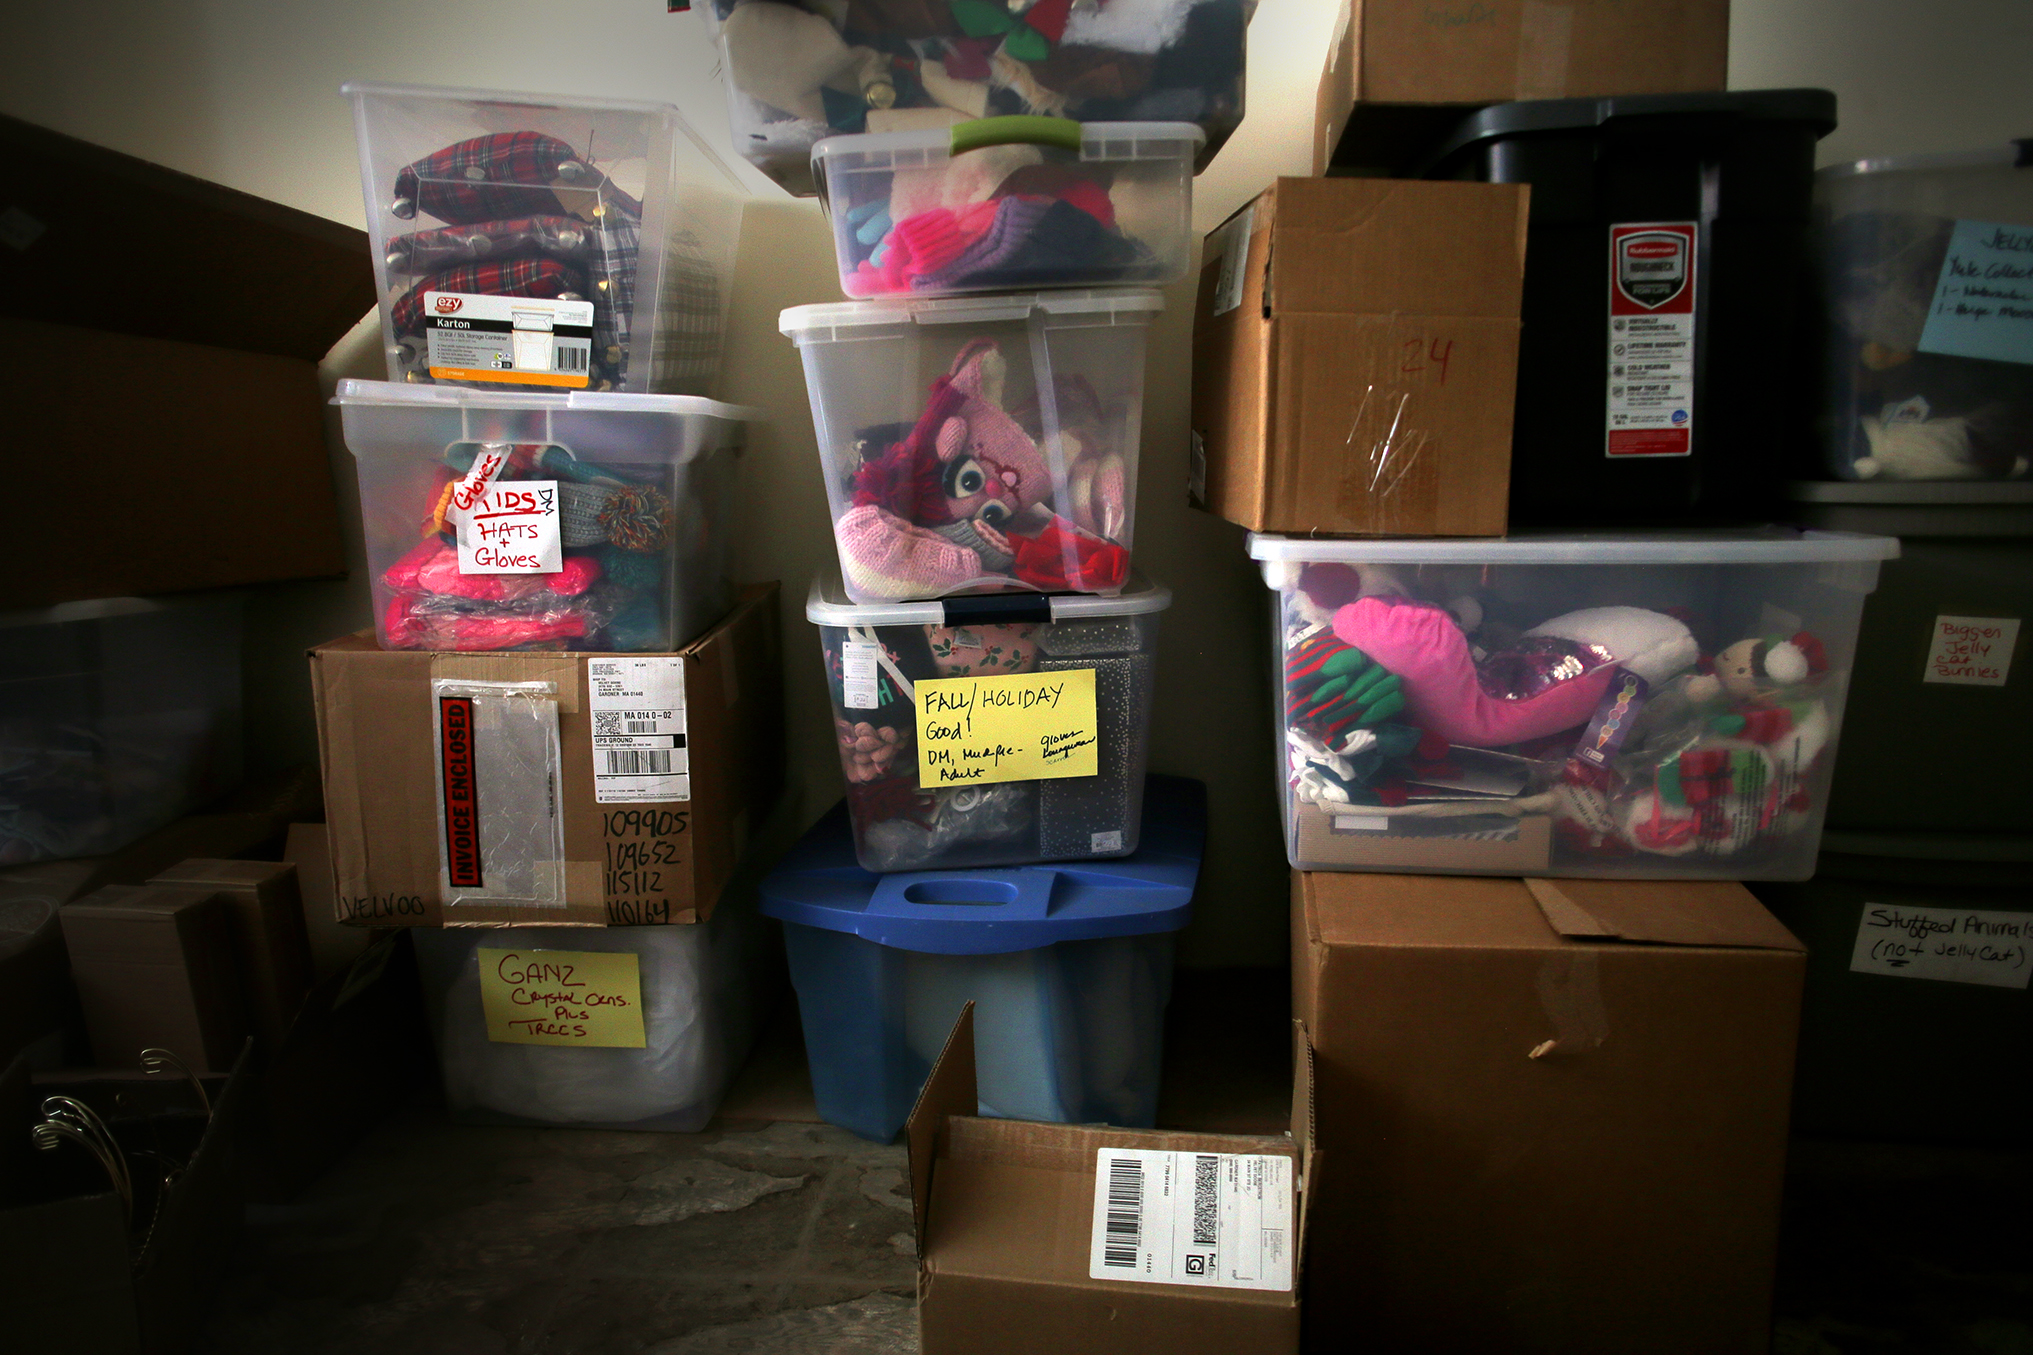 Bergstrom’s storage space is filled with items she wouldn’t normally have on hand yet.  